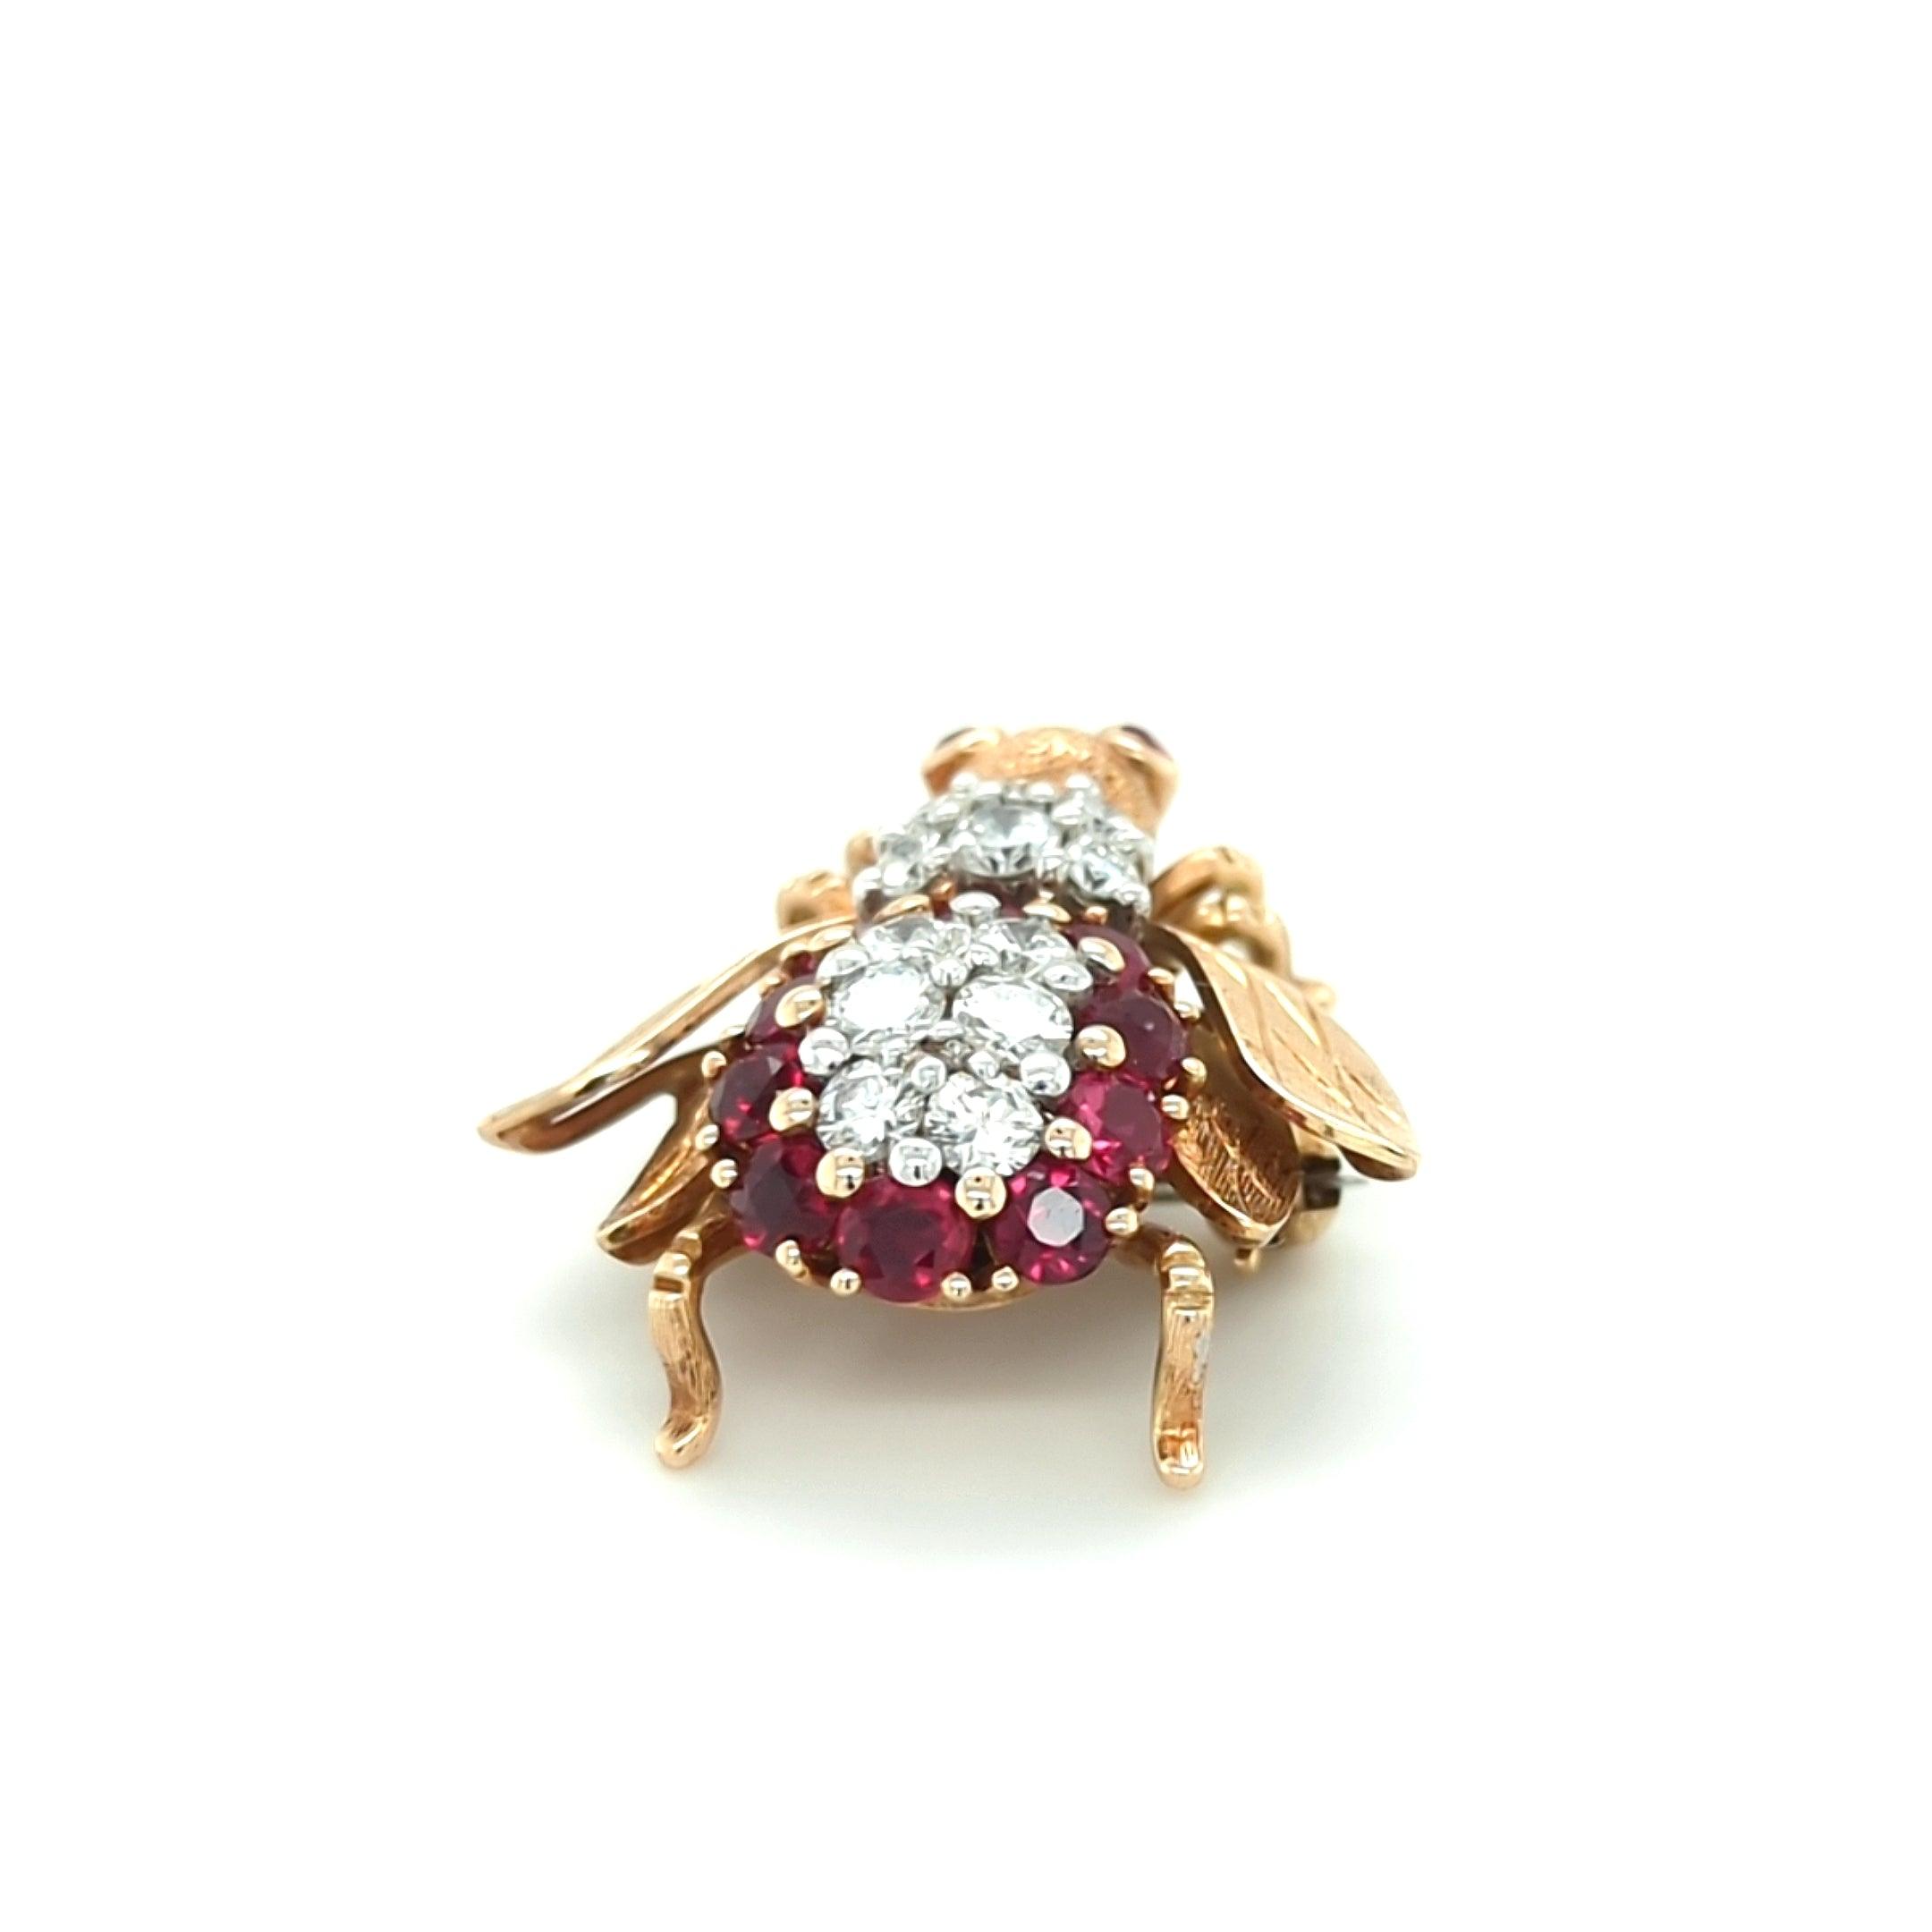 Vintage Ruby and Diamond Bee Brooch in 14kt Yellow Gold by Frank J. Golden - The Rutile Ltd